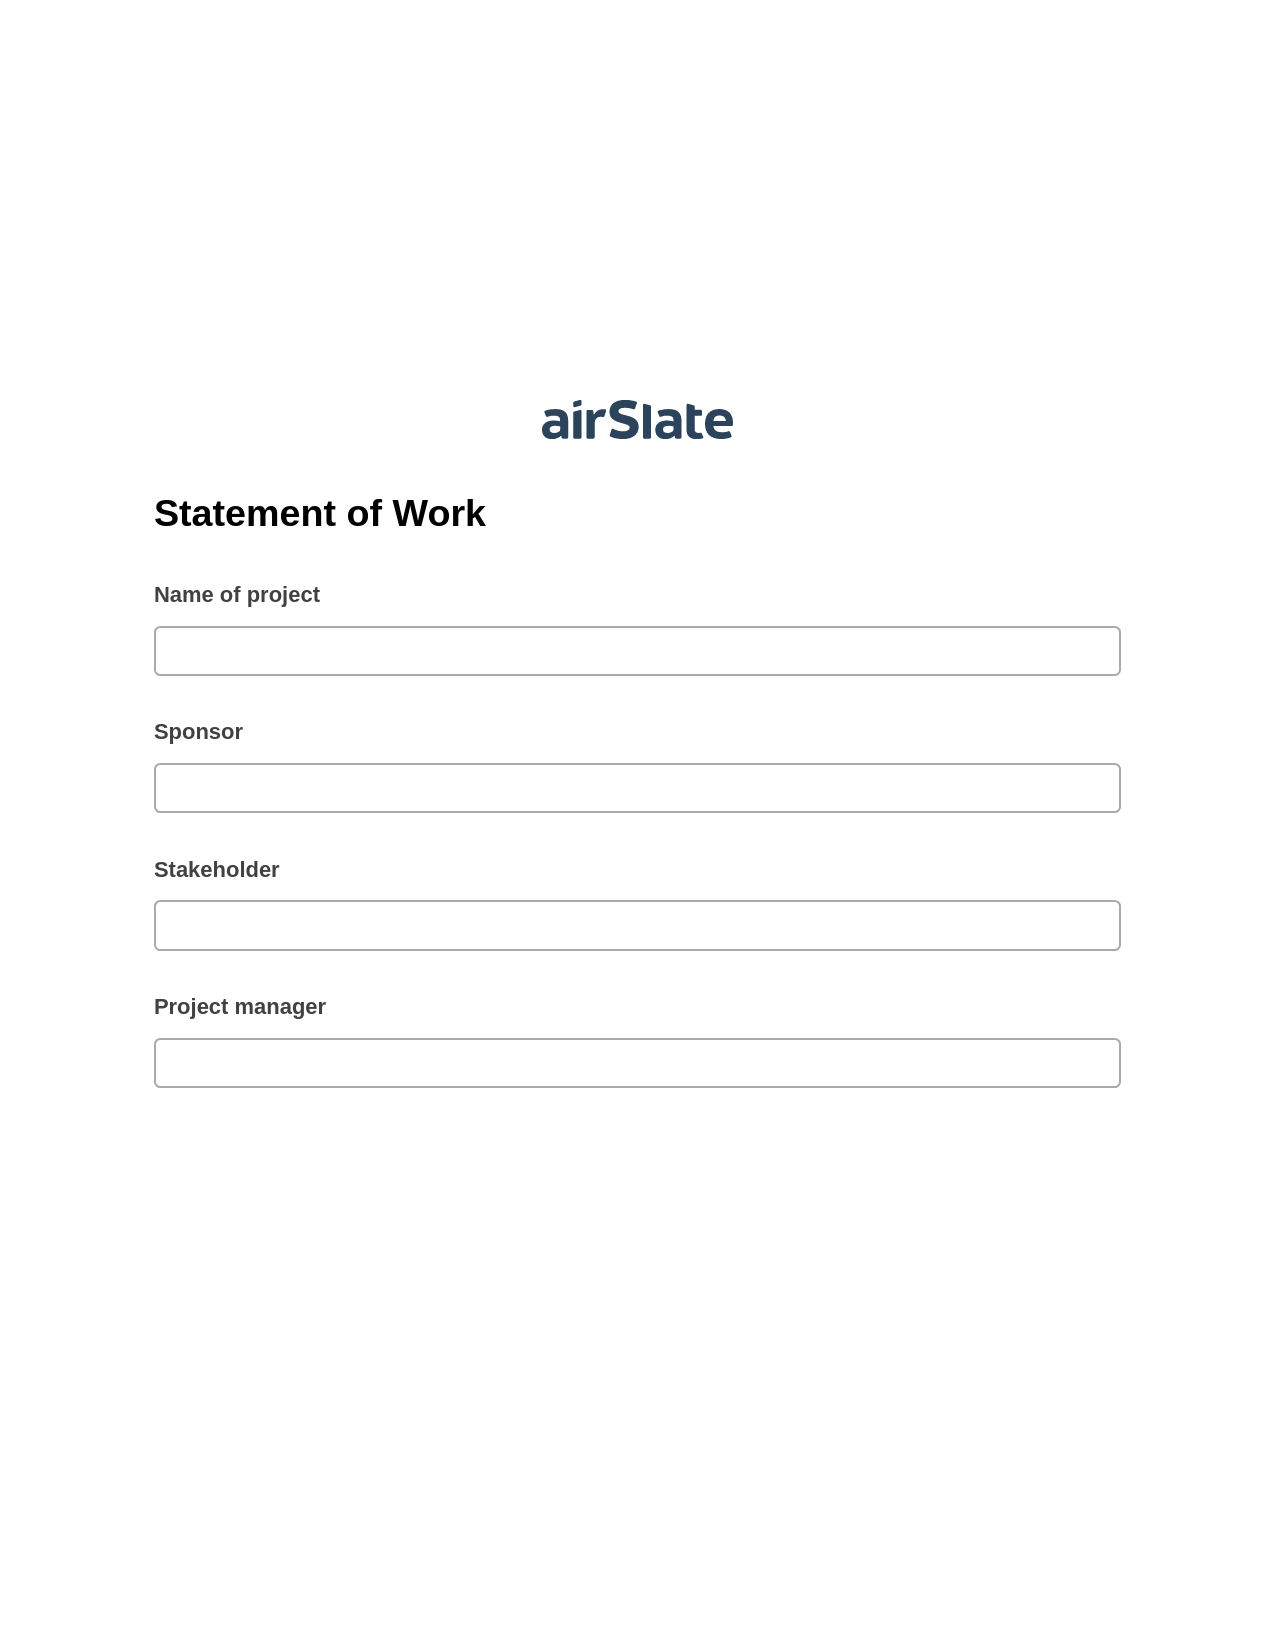 Statement of Work Pre-fill Dropdowns from Smartsheet Bot, Google Cloud Print Bot, Post-finish Document Bot